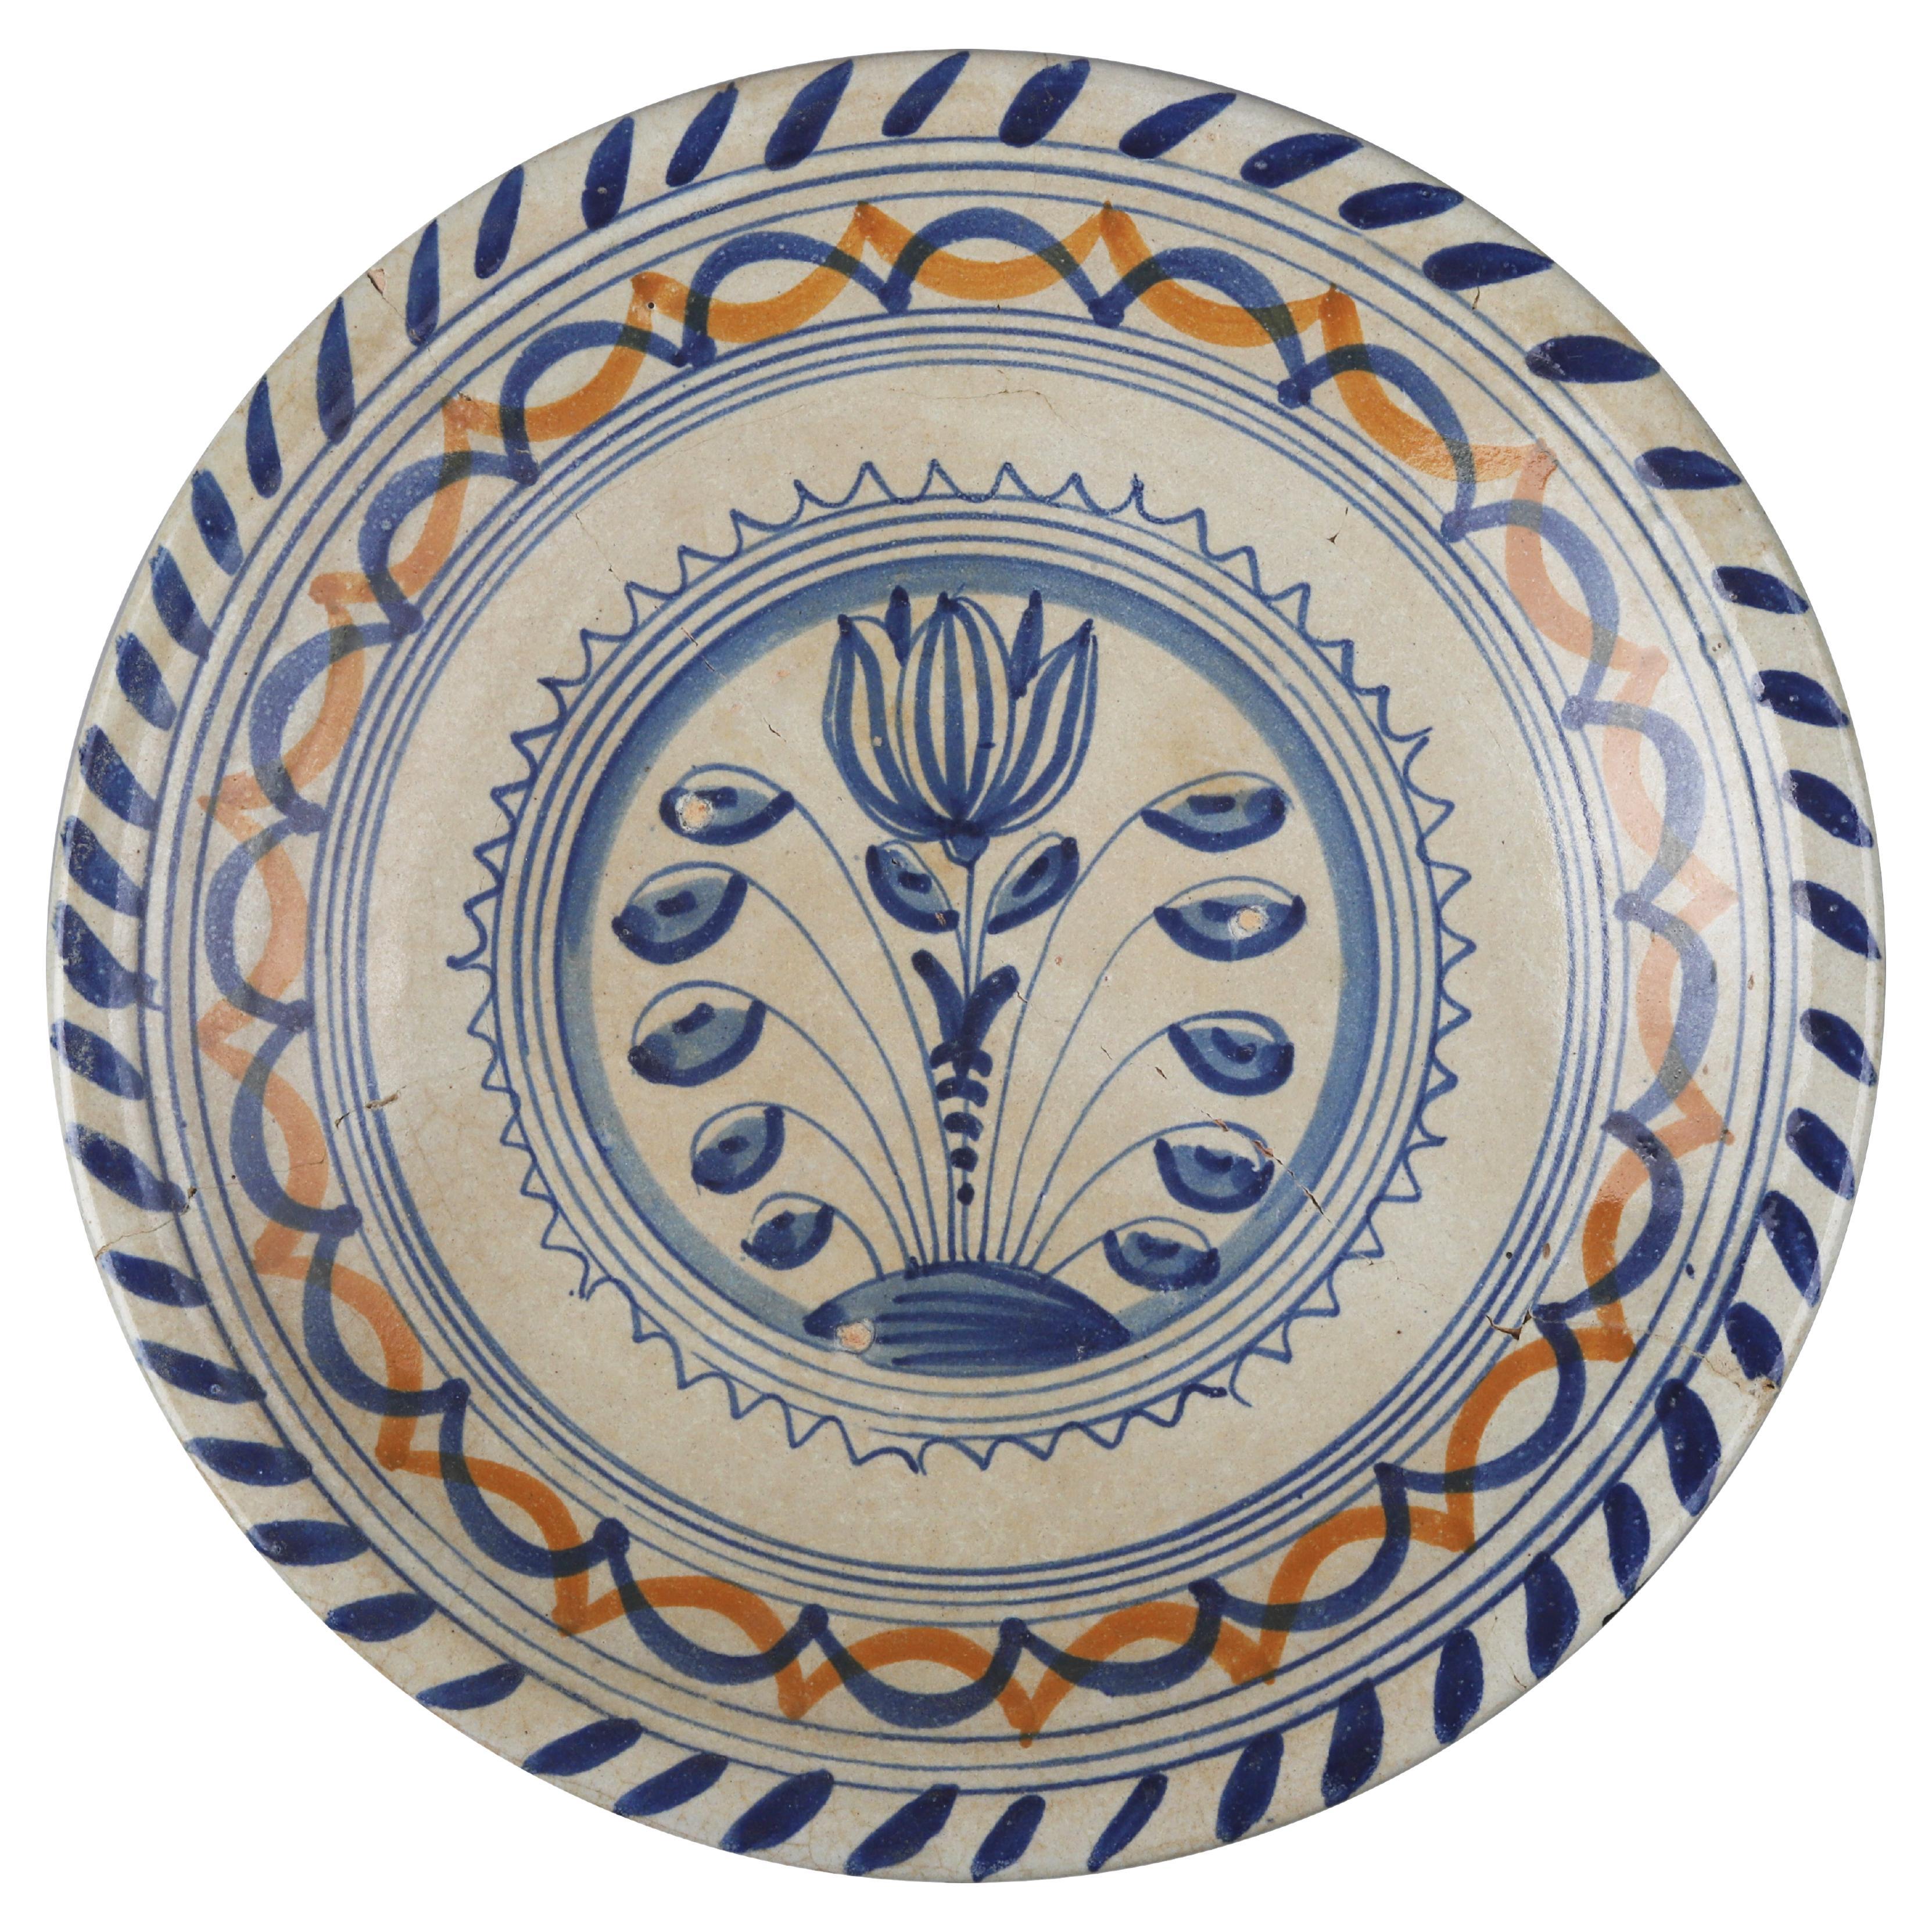 Rare Dutch Majolica Plate with Tulip, Early 17th Century